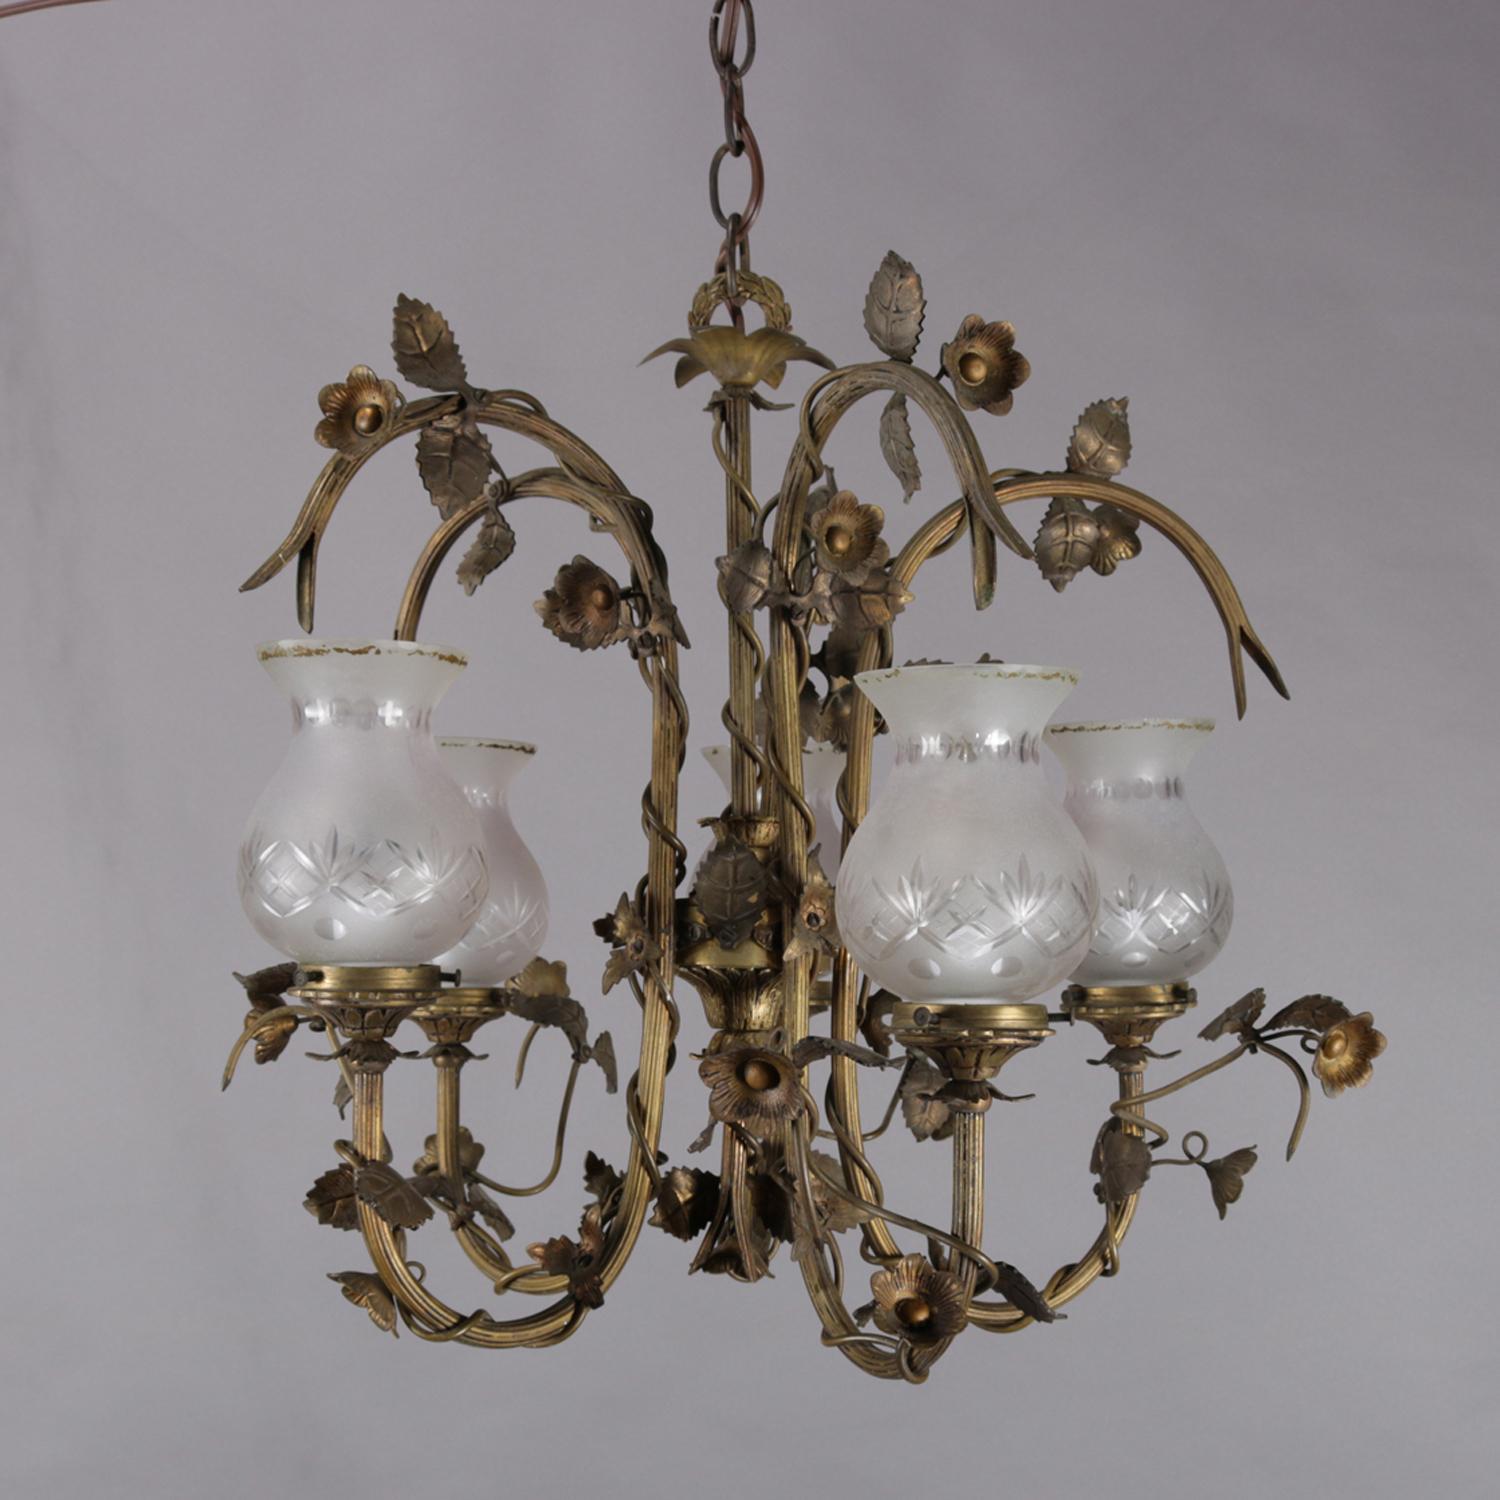 Vintage French style chandelier features gilt metal frame with five C-scroll arms wrapped in floral and vine 
terminating in lights with cut glass frosted shades, circa 1940.

Measures: 18